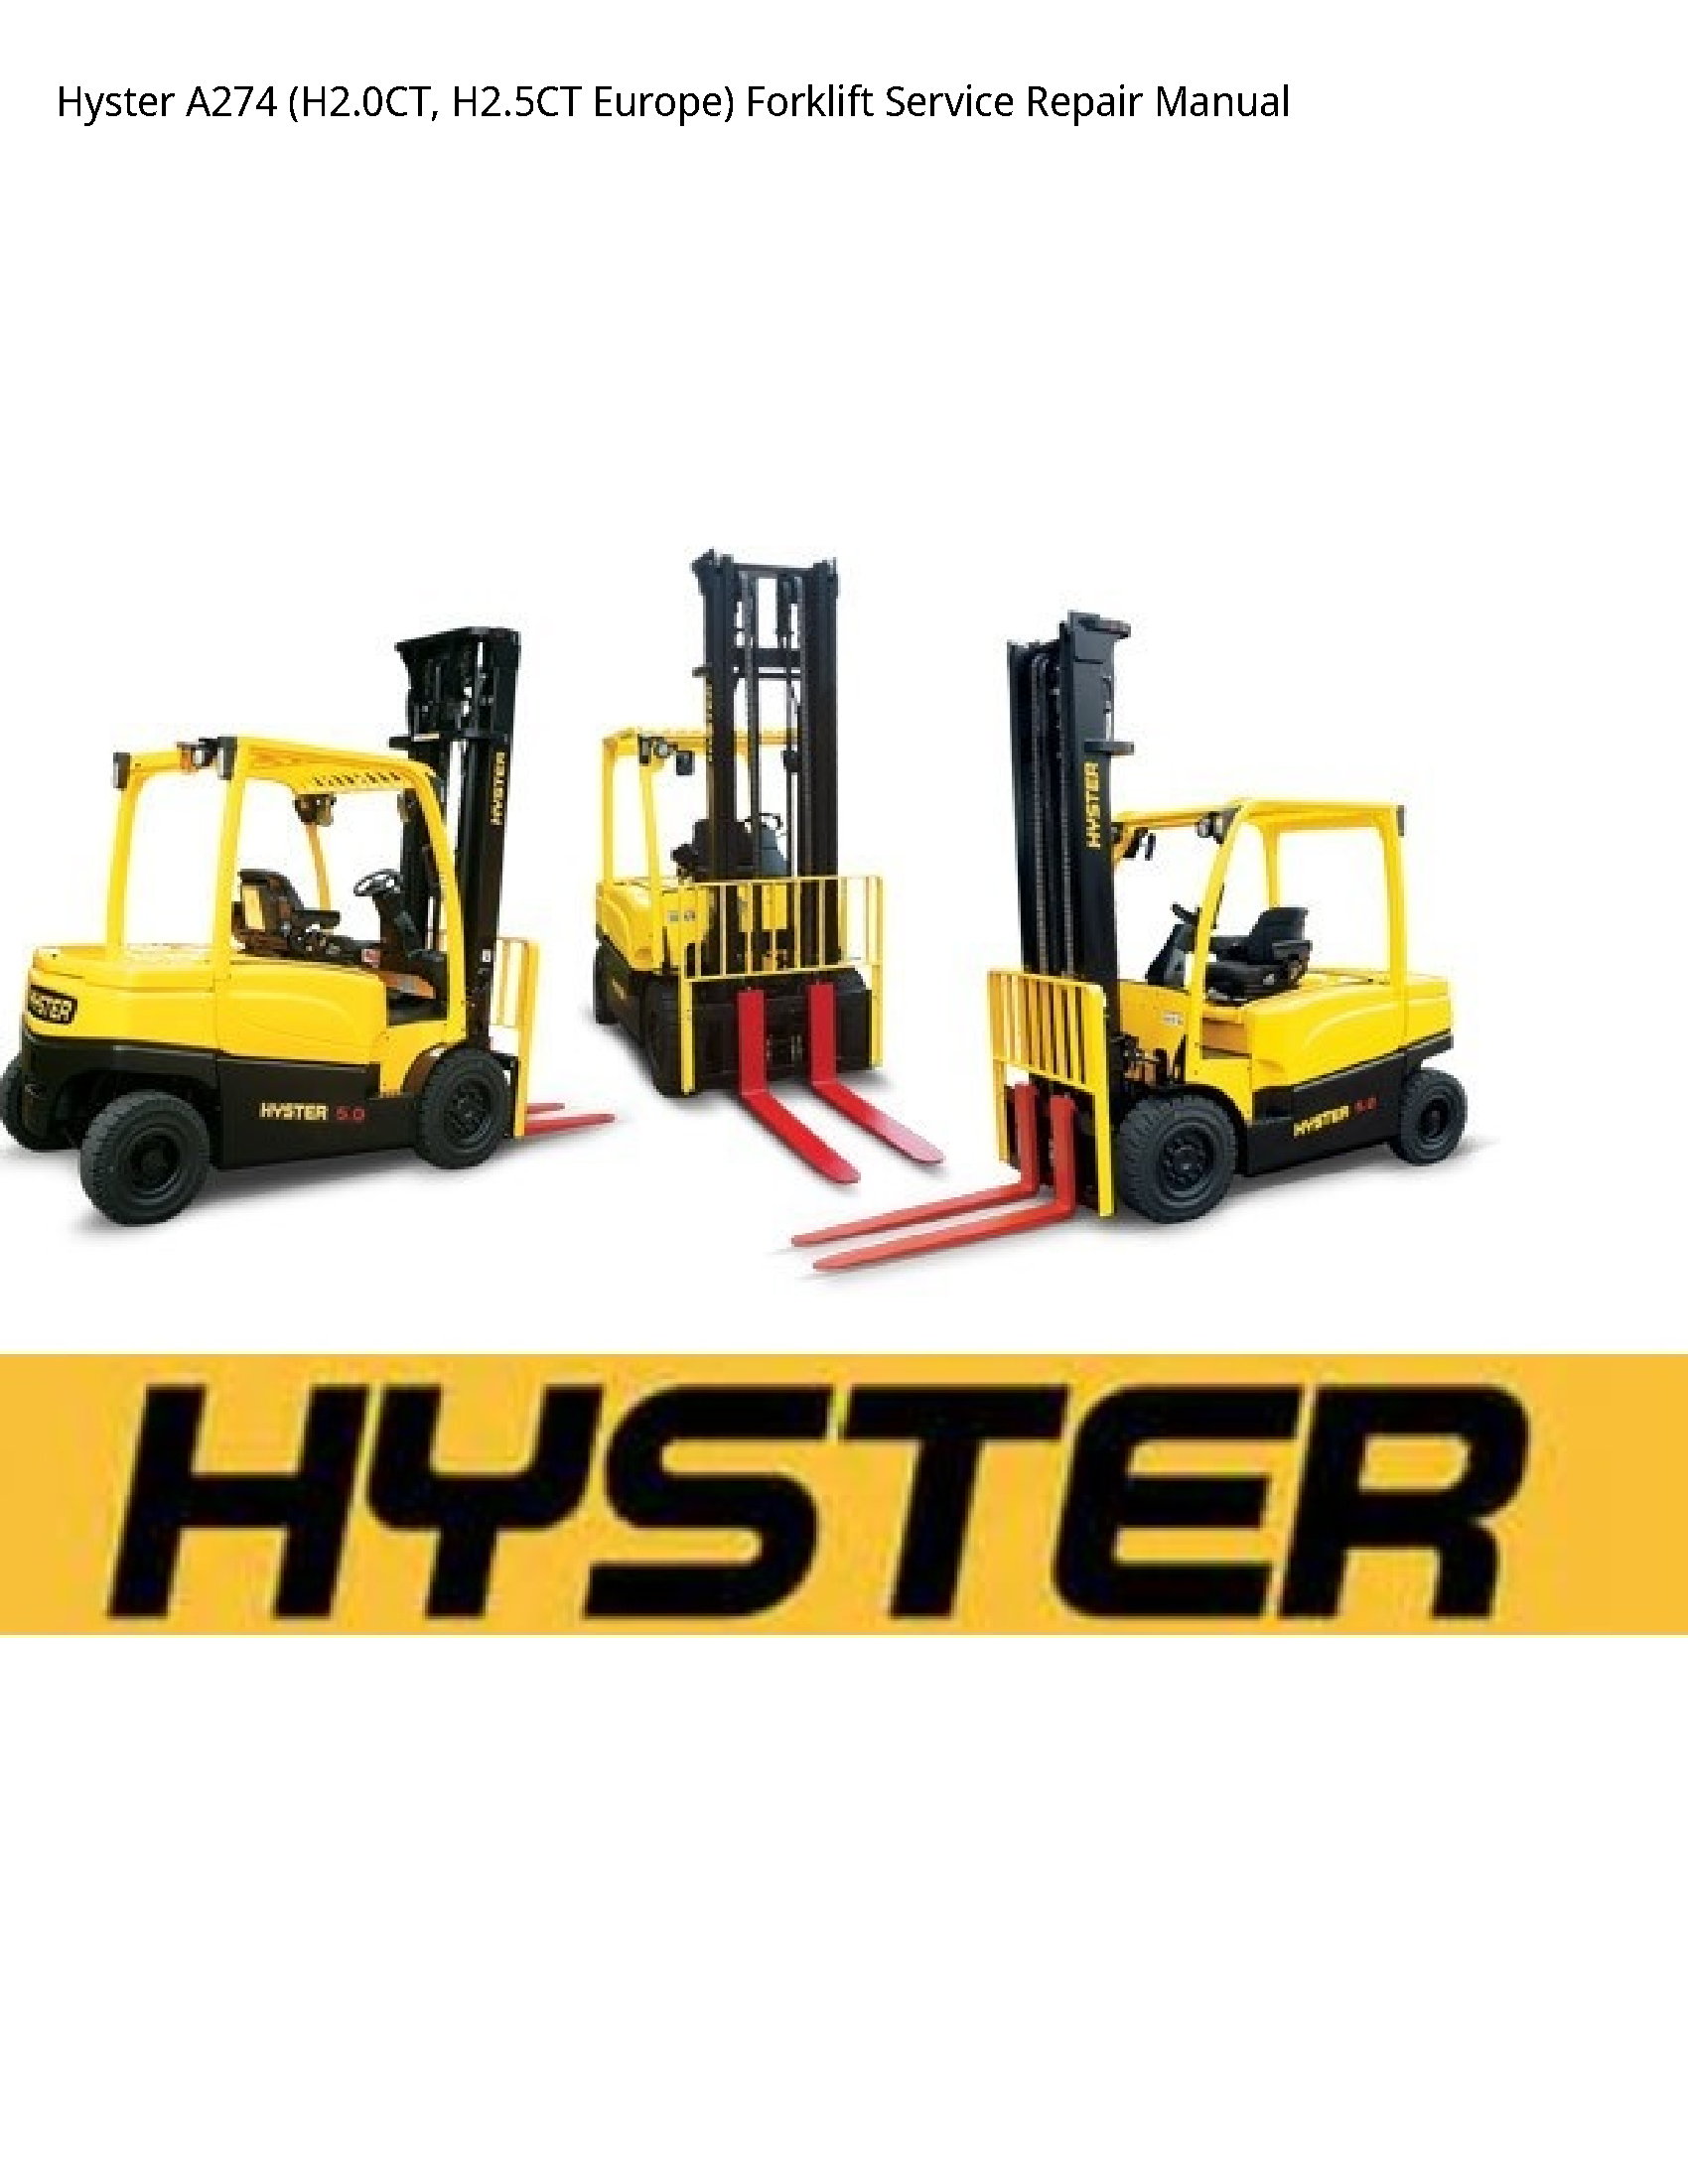 Hyster A274 Europe) Forklift manual